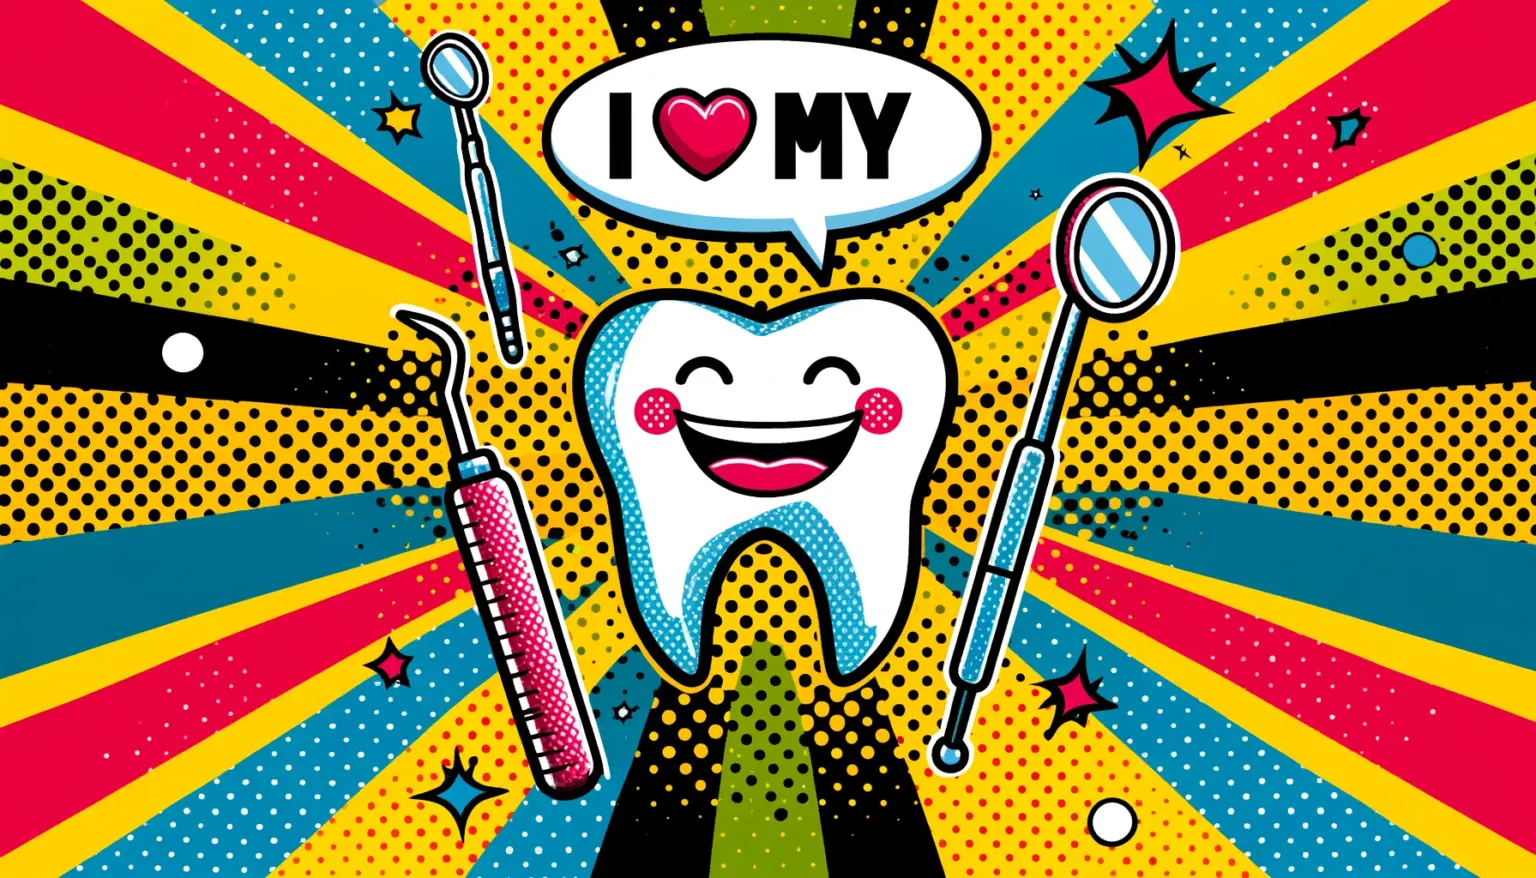 Warm Messages to Share on I Love My Dentist Day